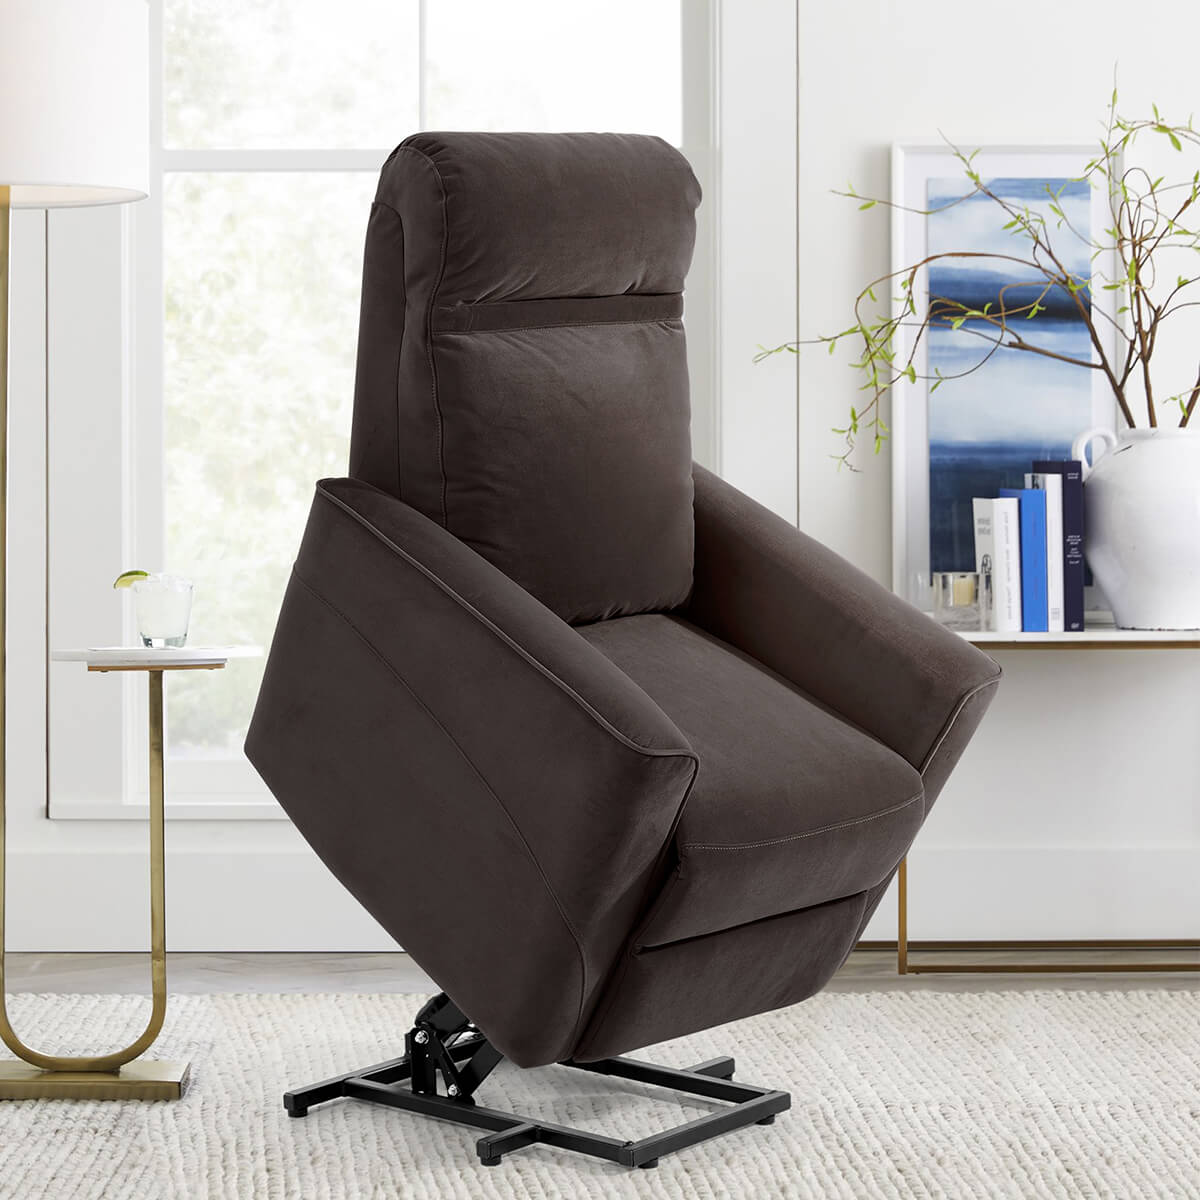 Soulout 8022 Power Lift Chair with Kneading Massage brown